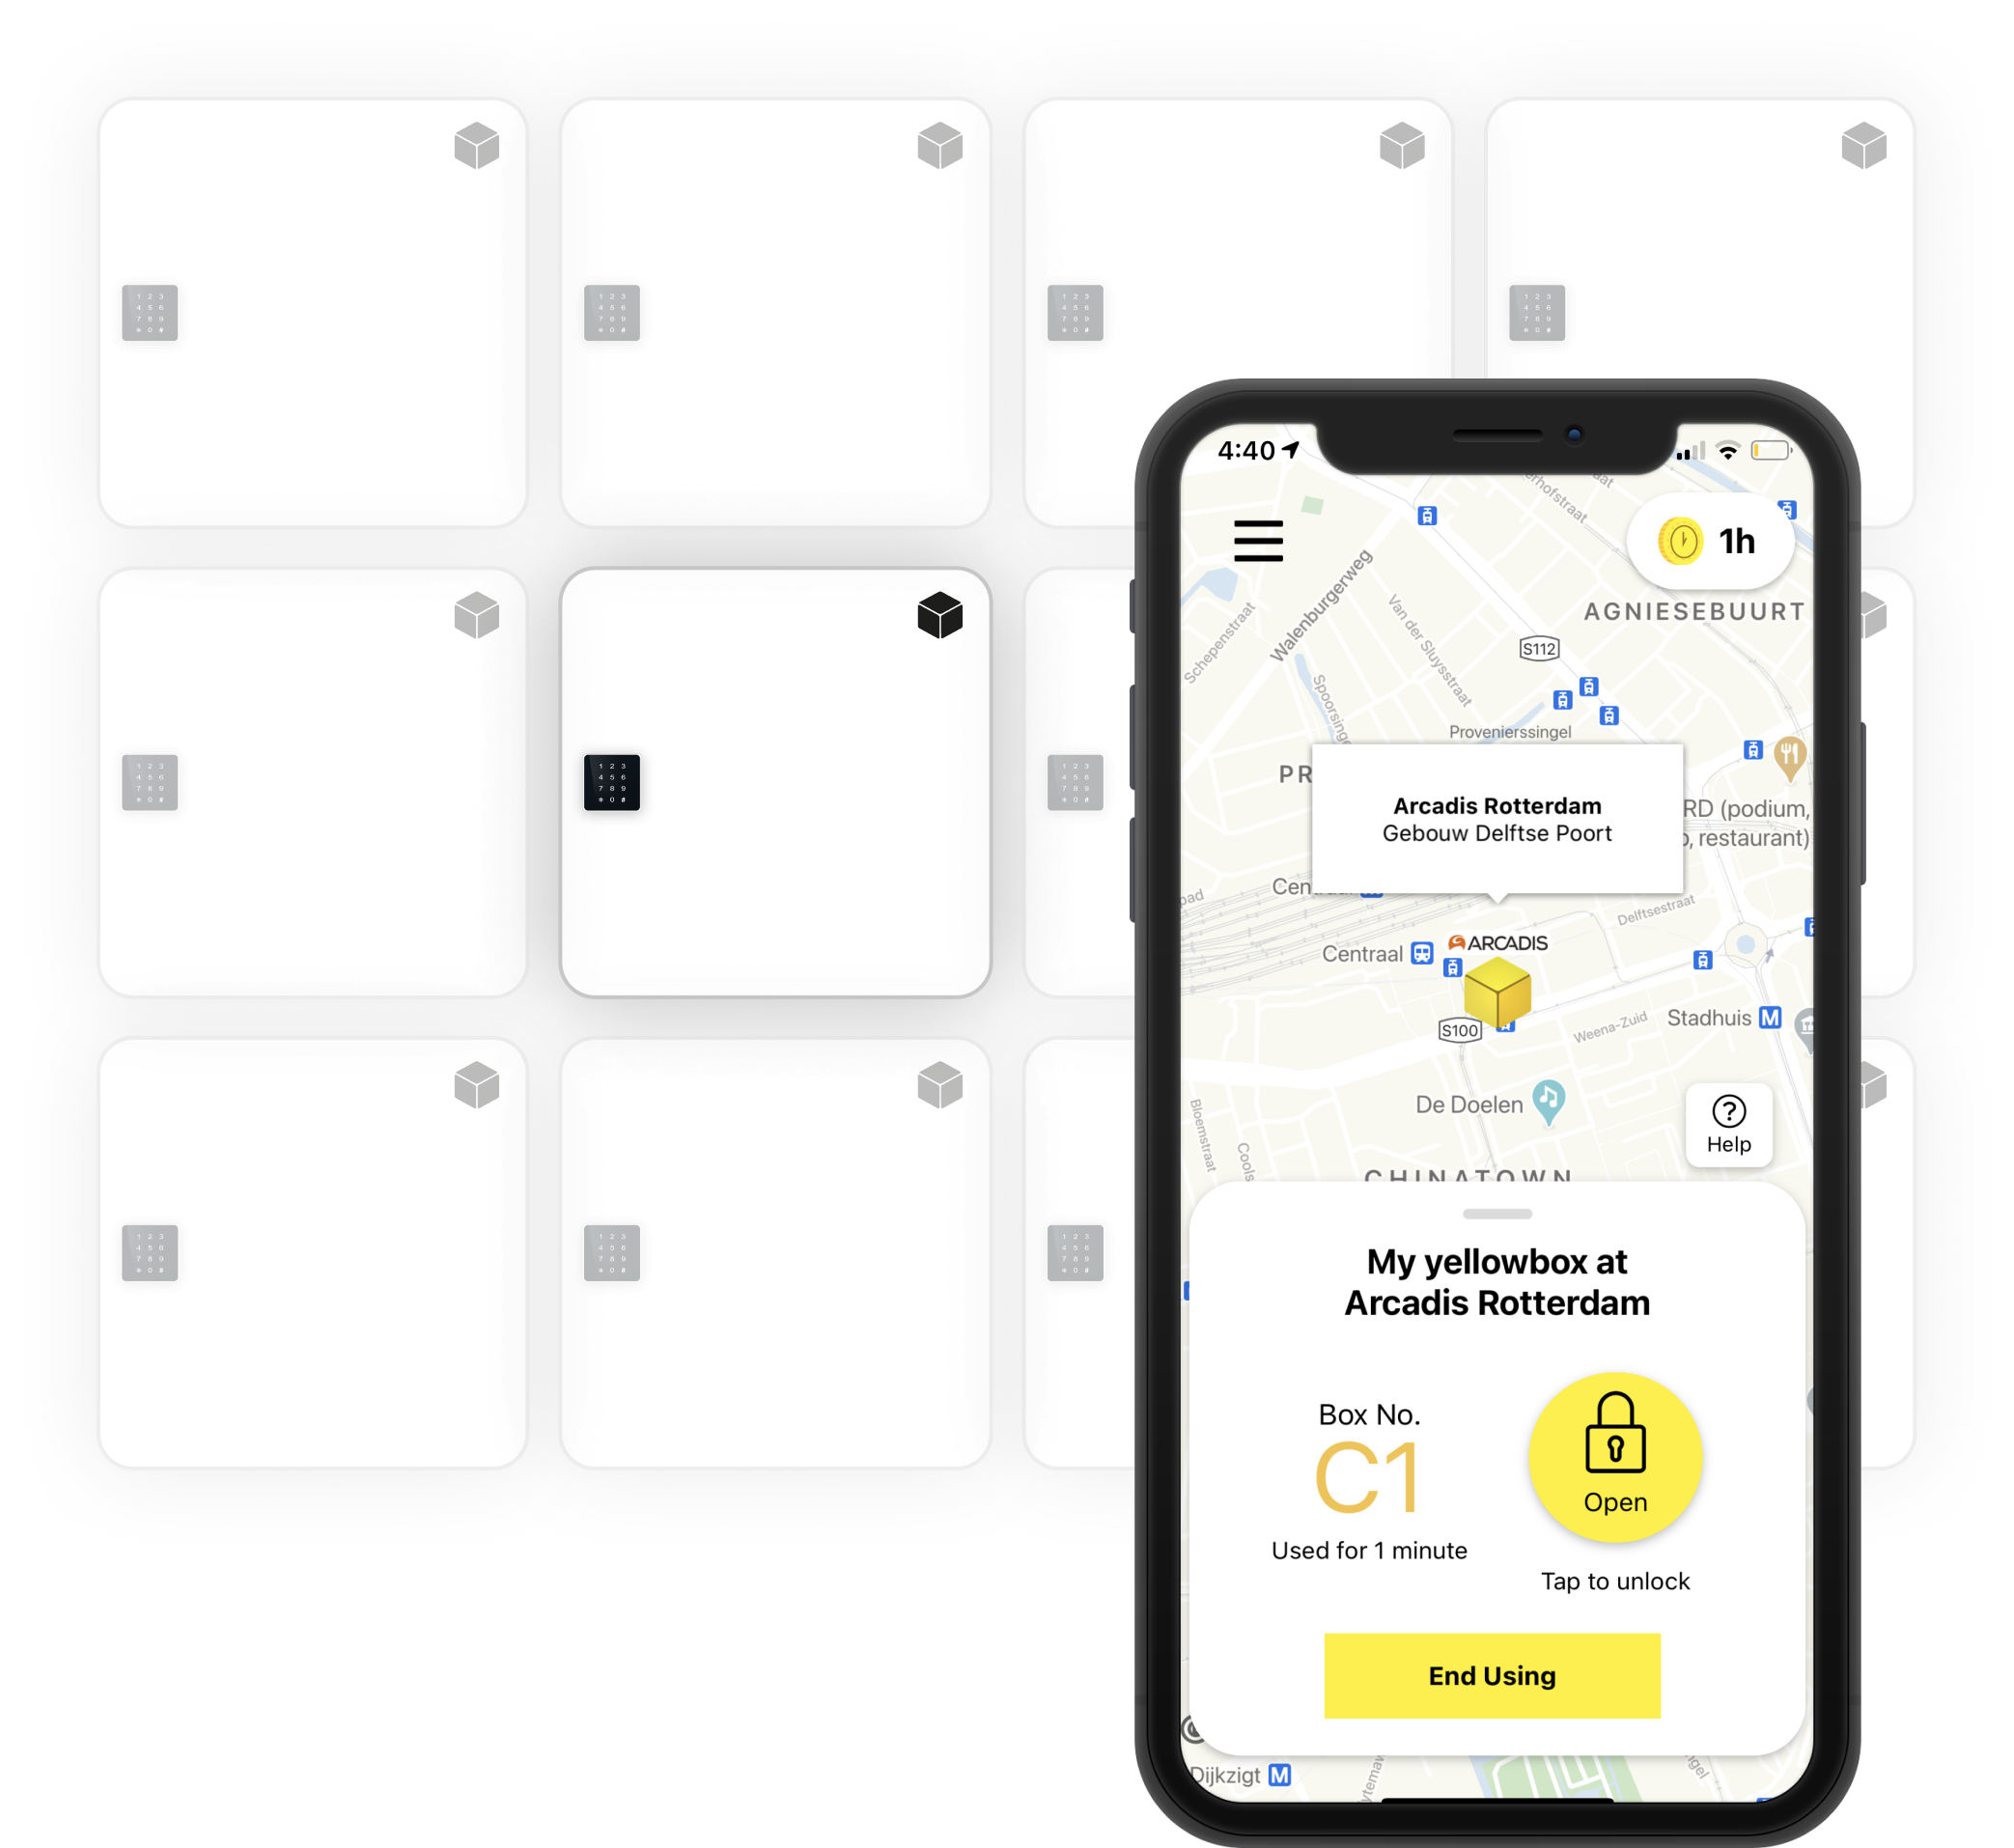 Access your locker system using the easy to use Yellowbox app